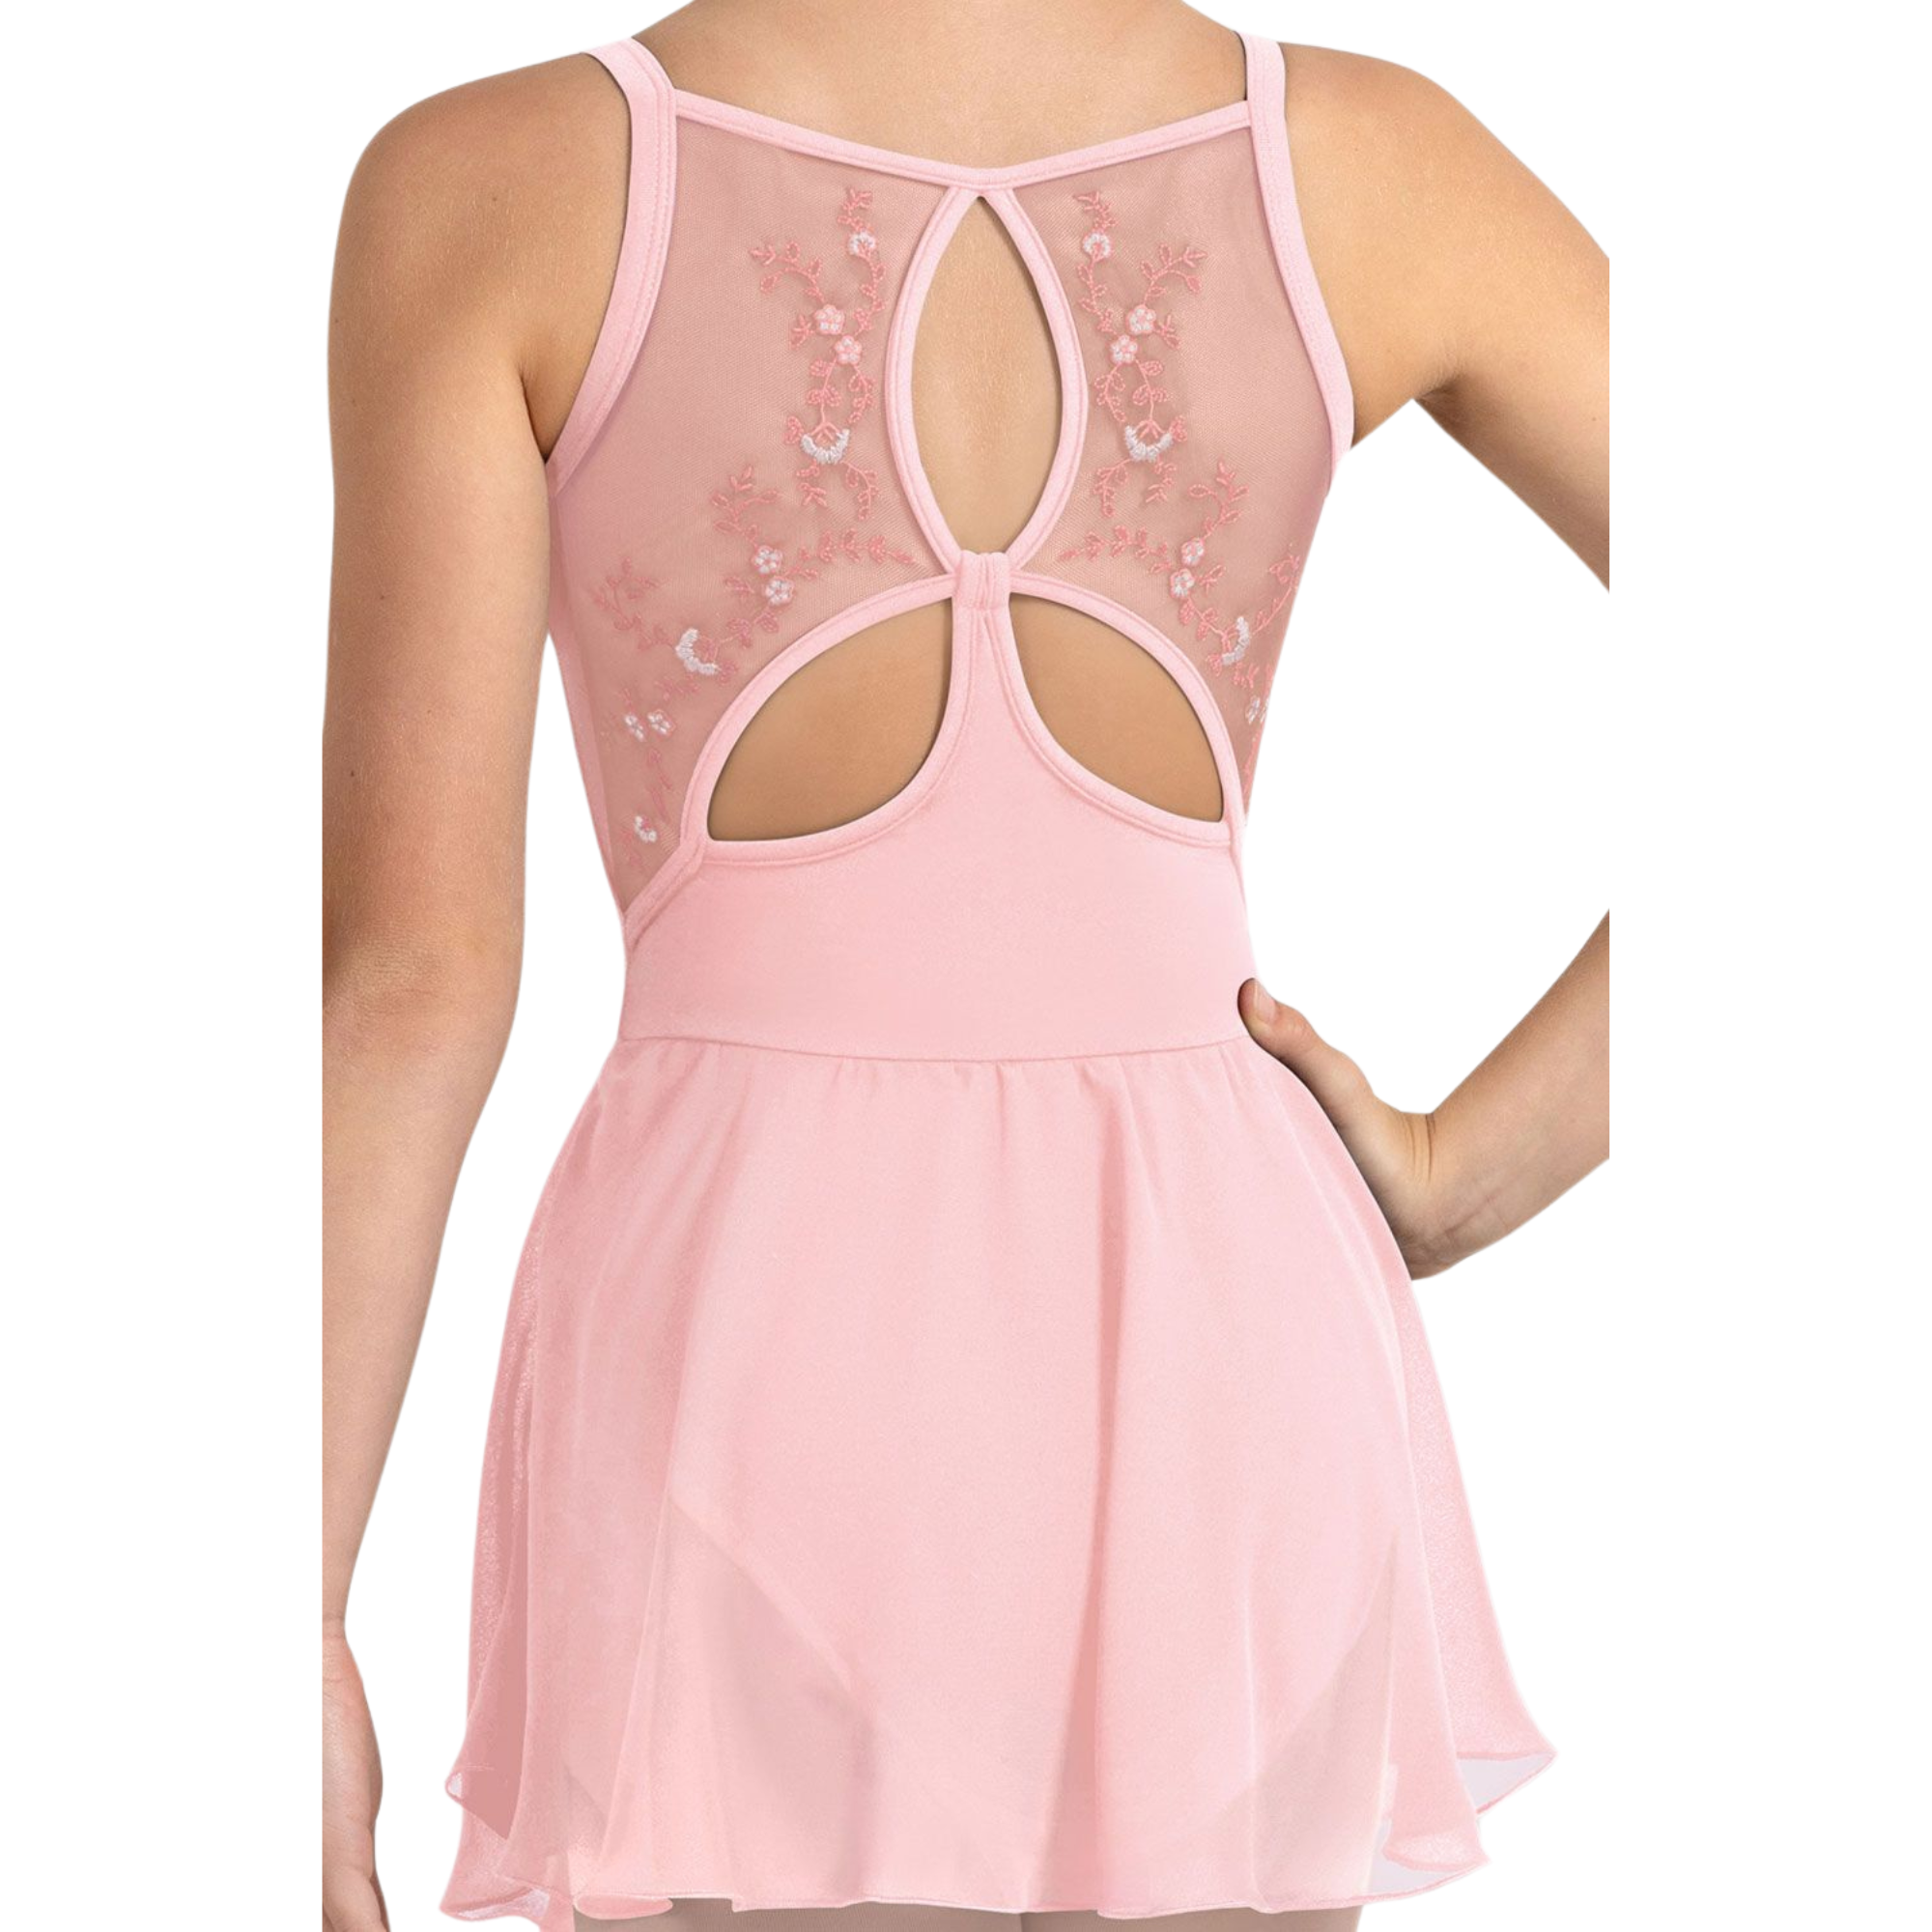 Bloch CL4217 Embroidered Poppy Skirted Camisole Leotard Candy Pink Back Close Up